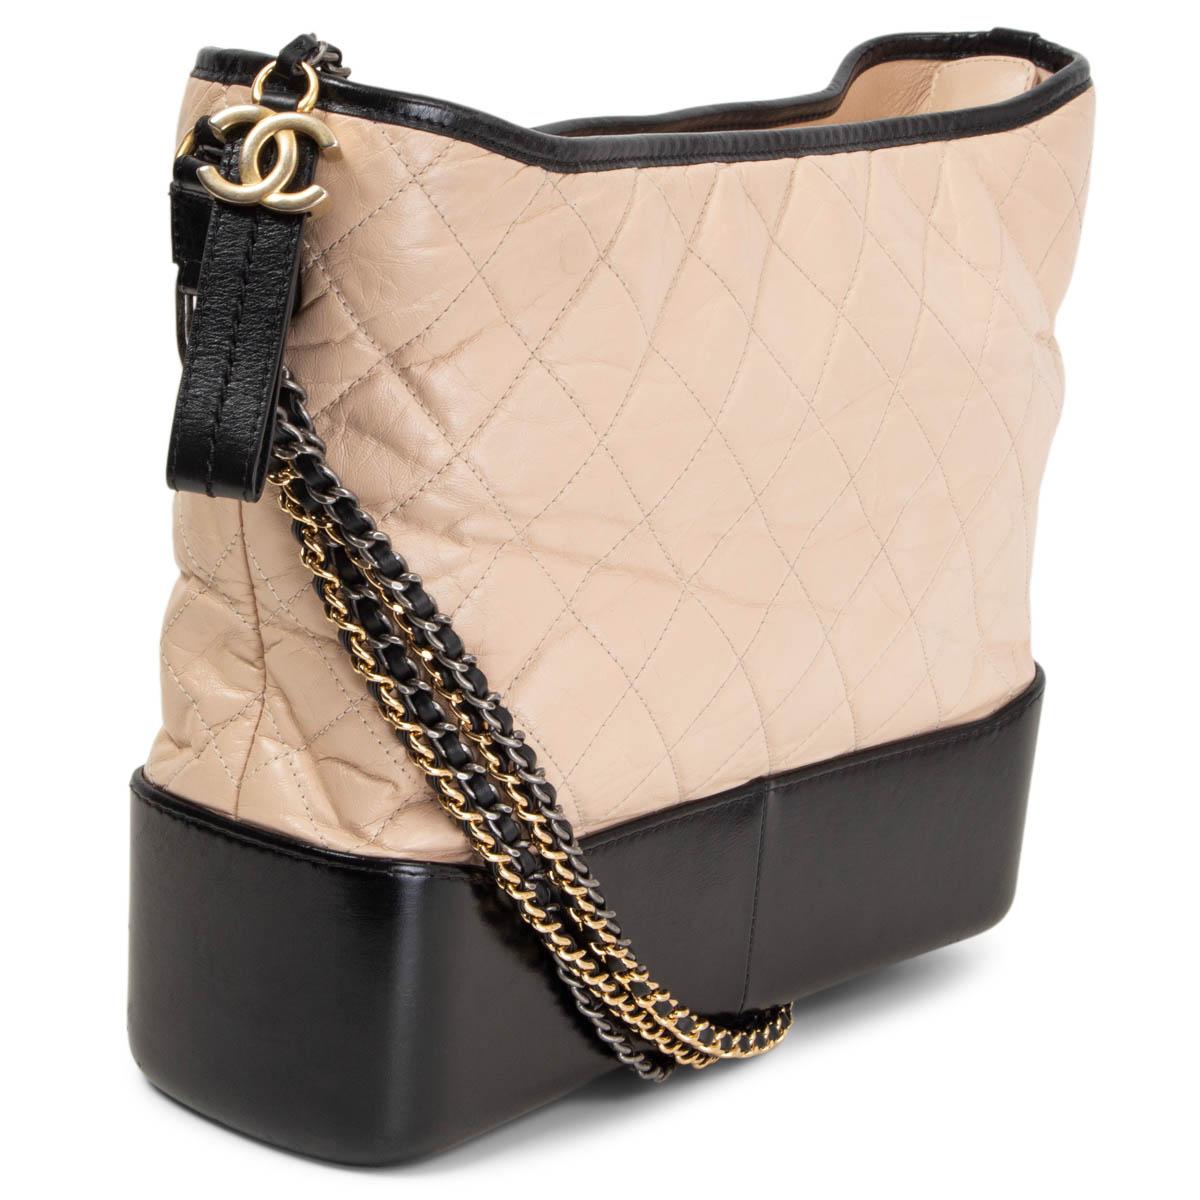 100% authentic Chanel Gabrielle Large Hobo Bag in nude aged calfskin and a black bottom smooth calfskin with trimmings and shoulder-strap. Lined in burgundy grosgrain with one zip pocket against the back and two open pockets against the front